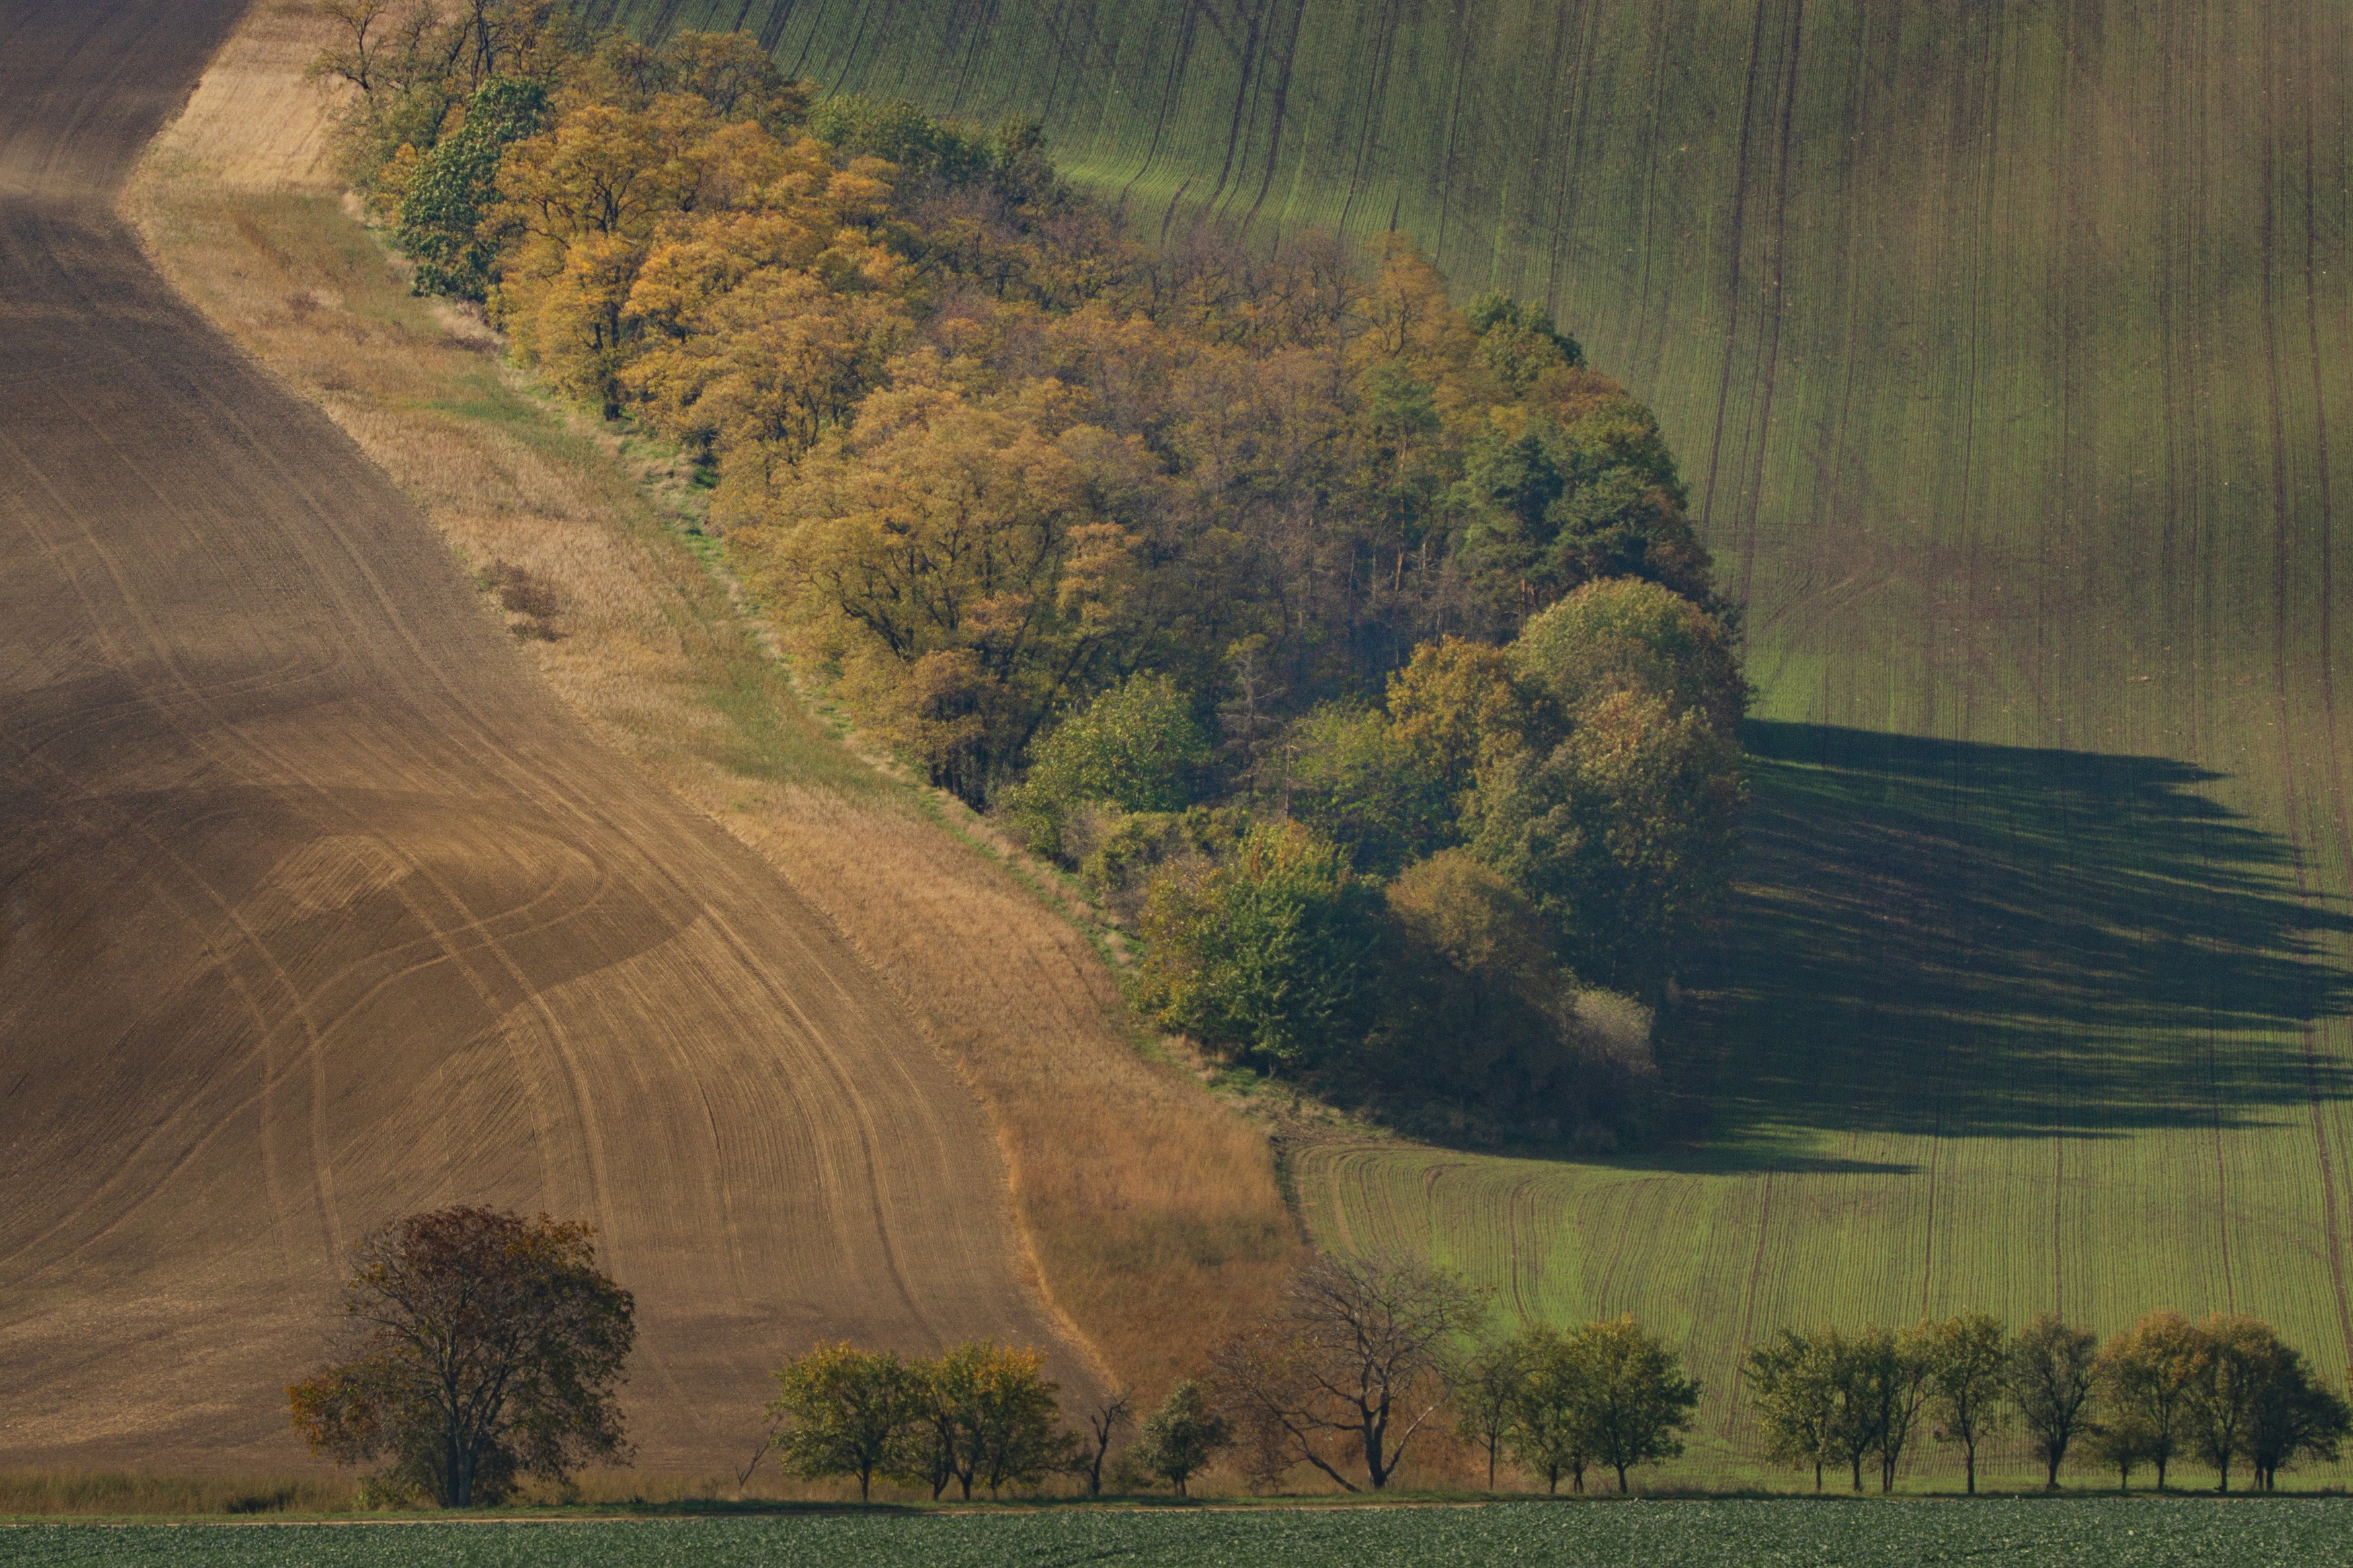 Horizontal, Landscape-Scenery, Nature, Agricultural, Field, Rural, Agriculture, Tree, Farm, Grass, Autumn, Field, Moravia, Damian Cyfka